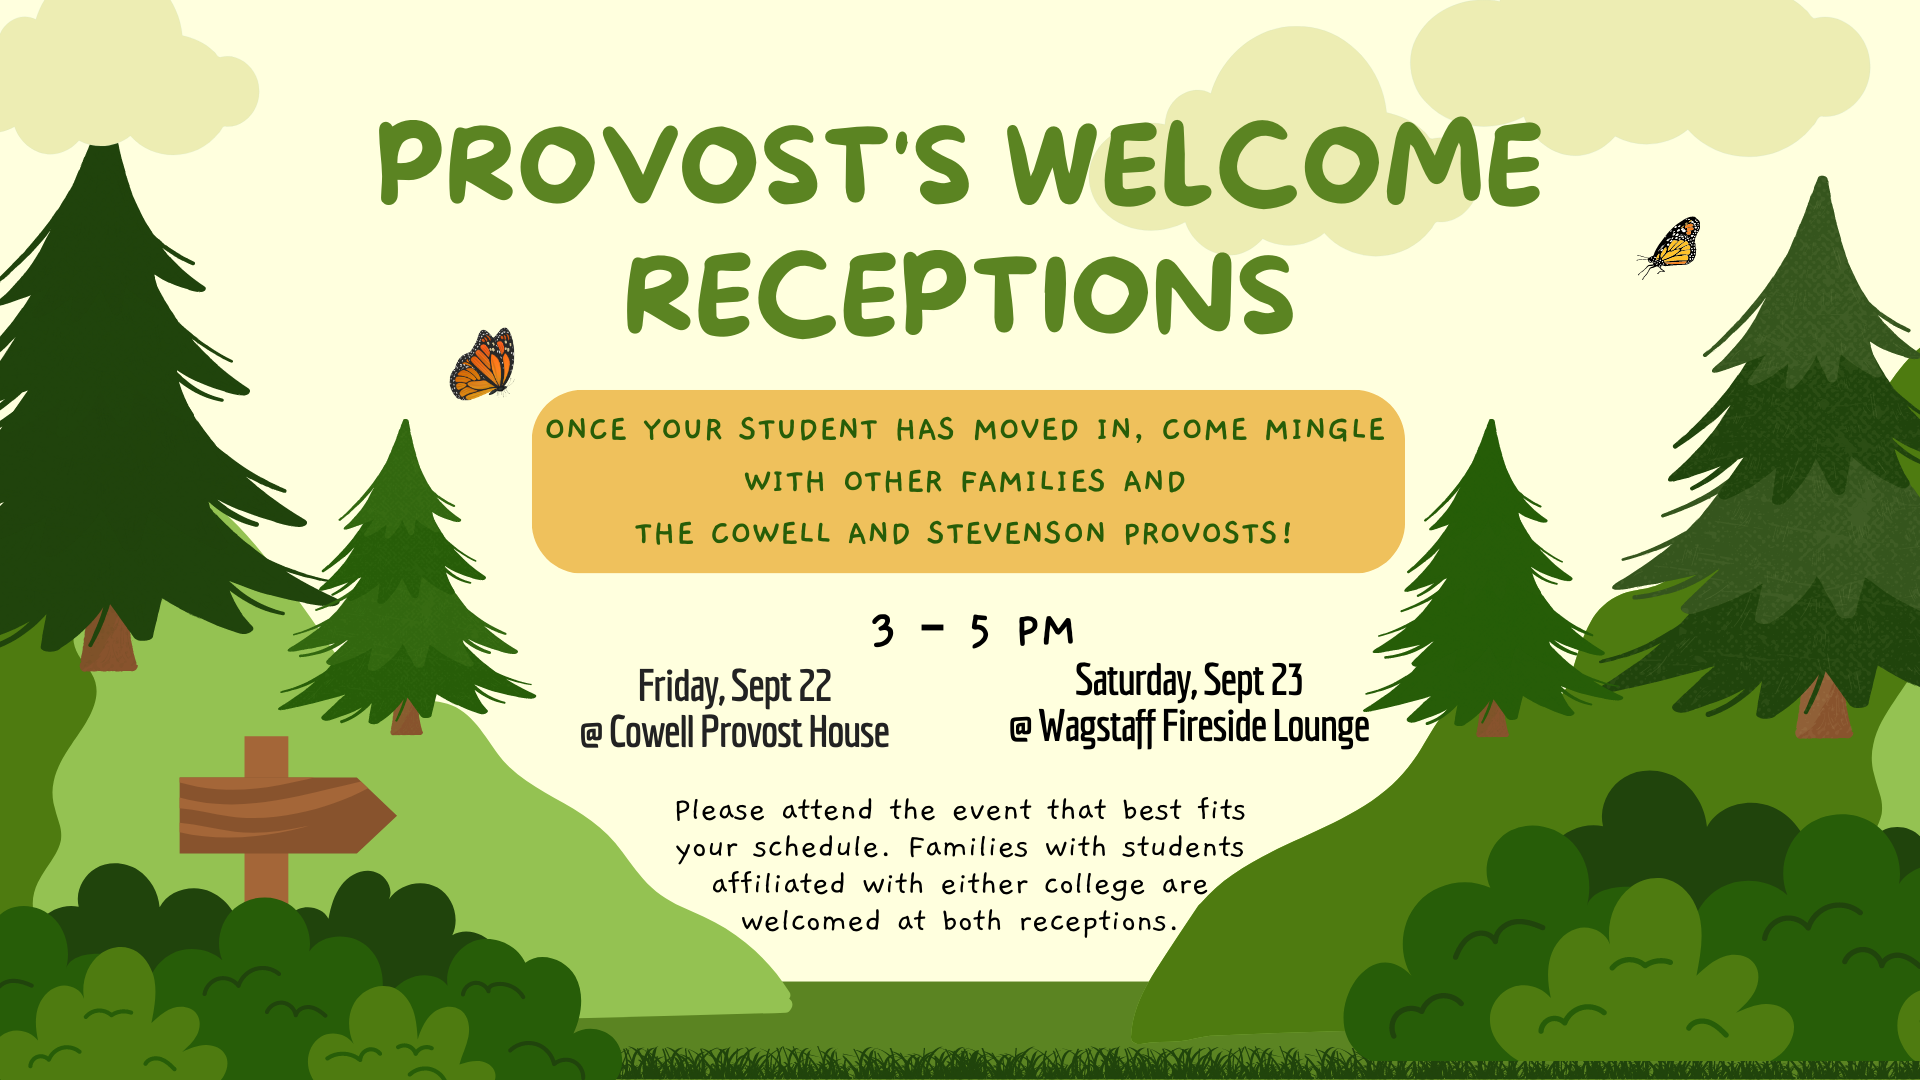 Join us for a reception at the Cowell Provost House on September 22 or at the Wagstaff Fireside Lounge on September 23 from 3 to 5pm.